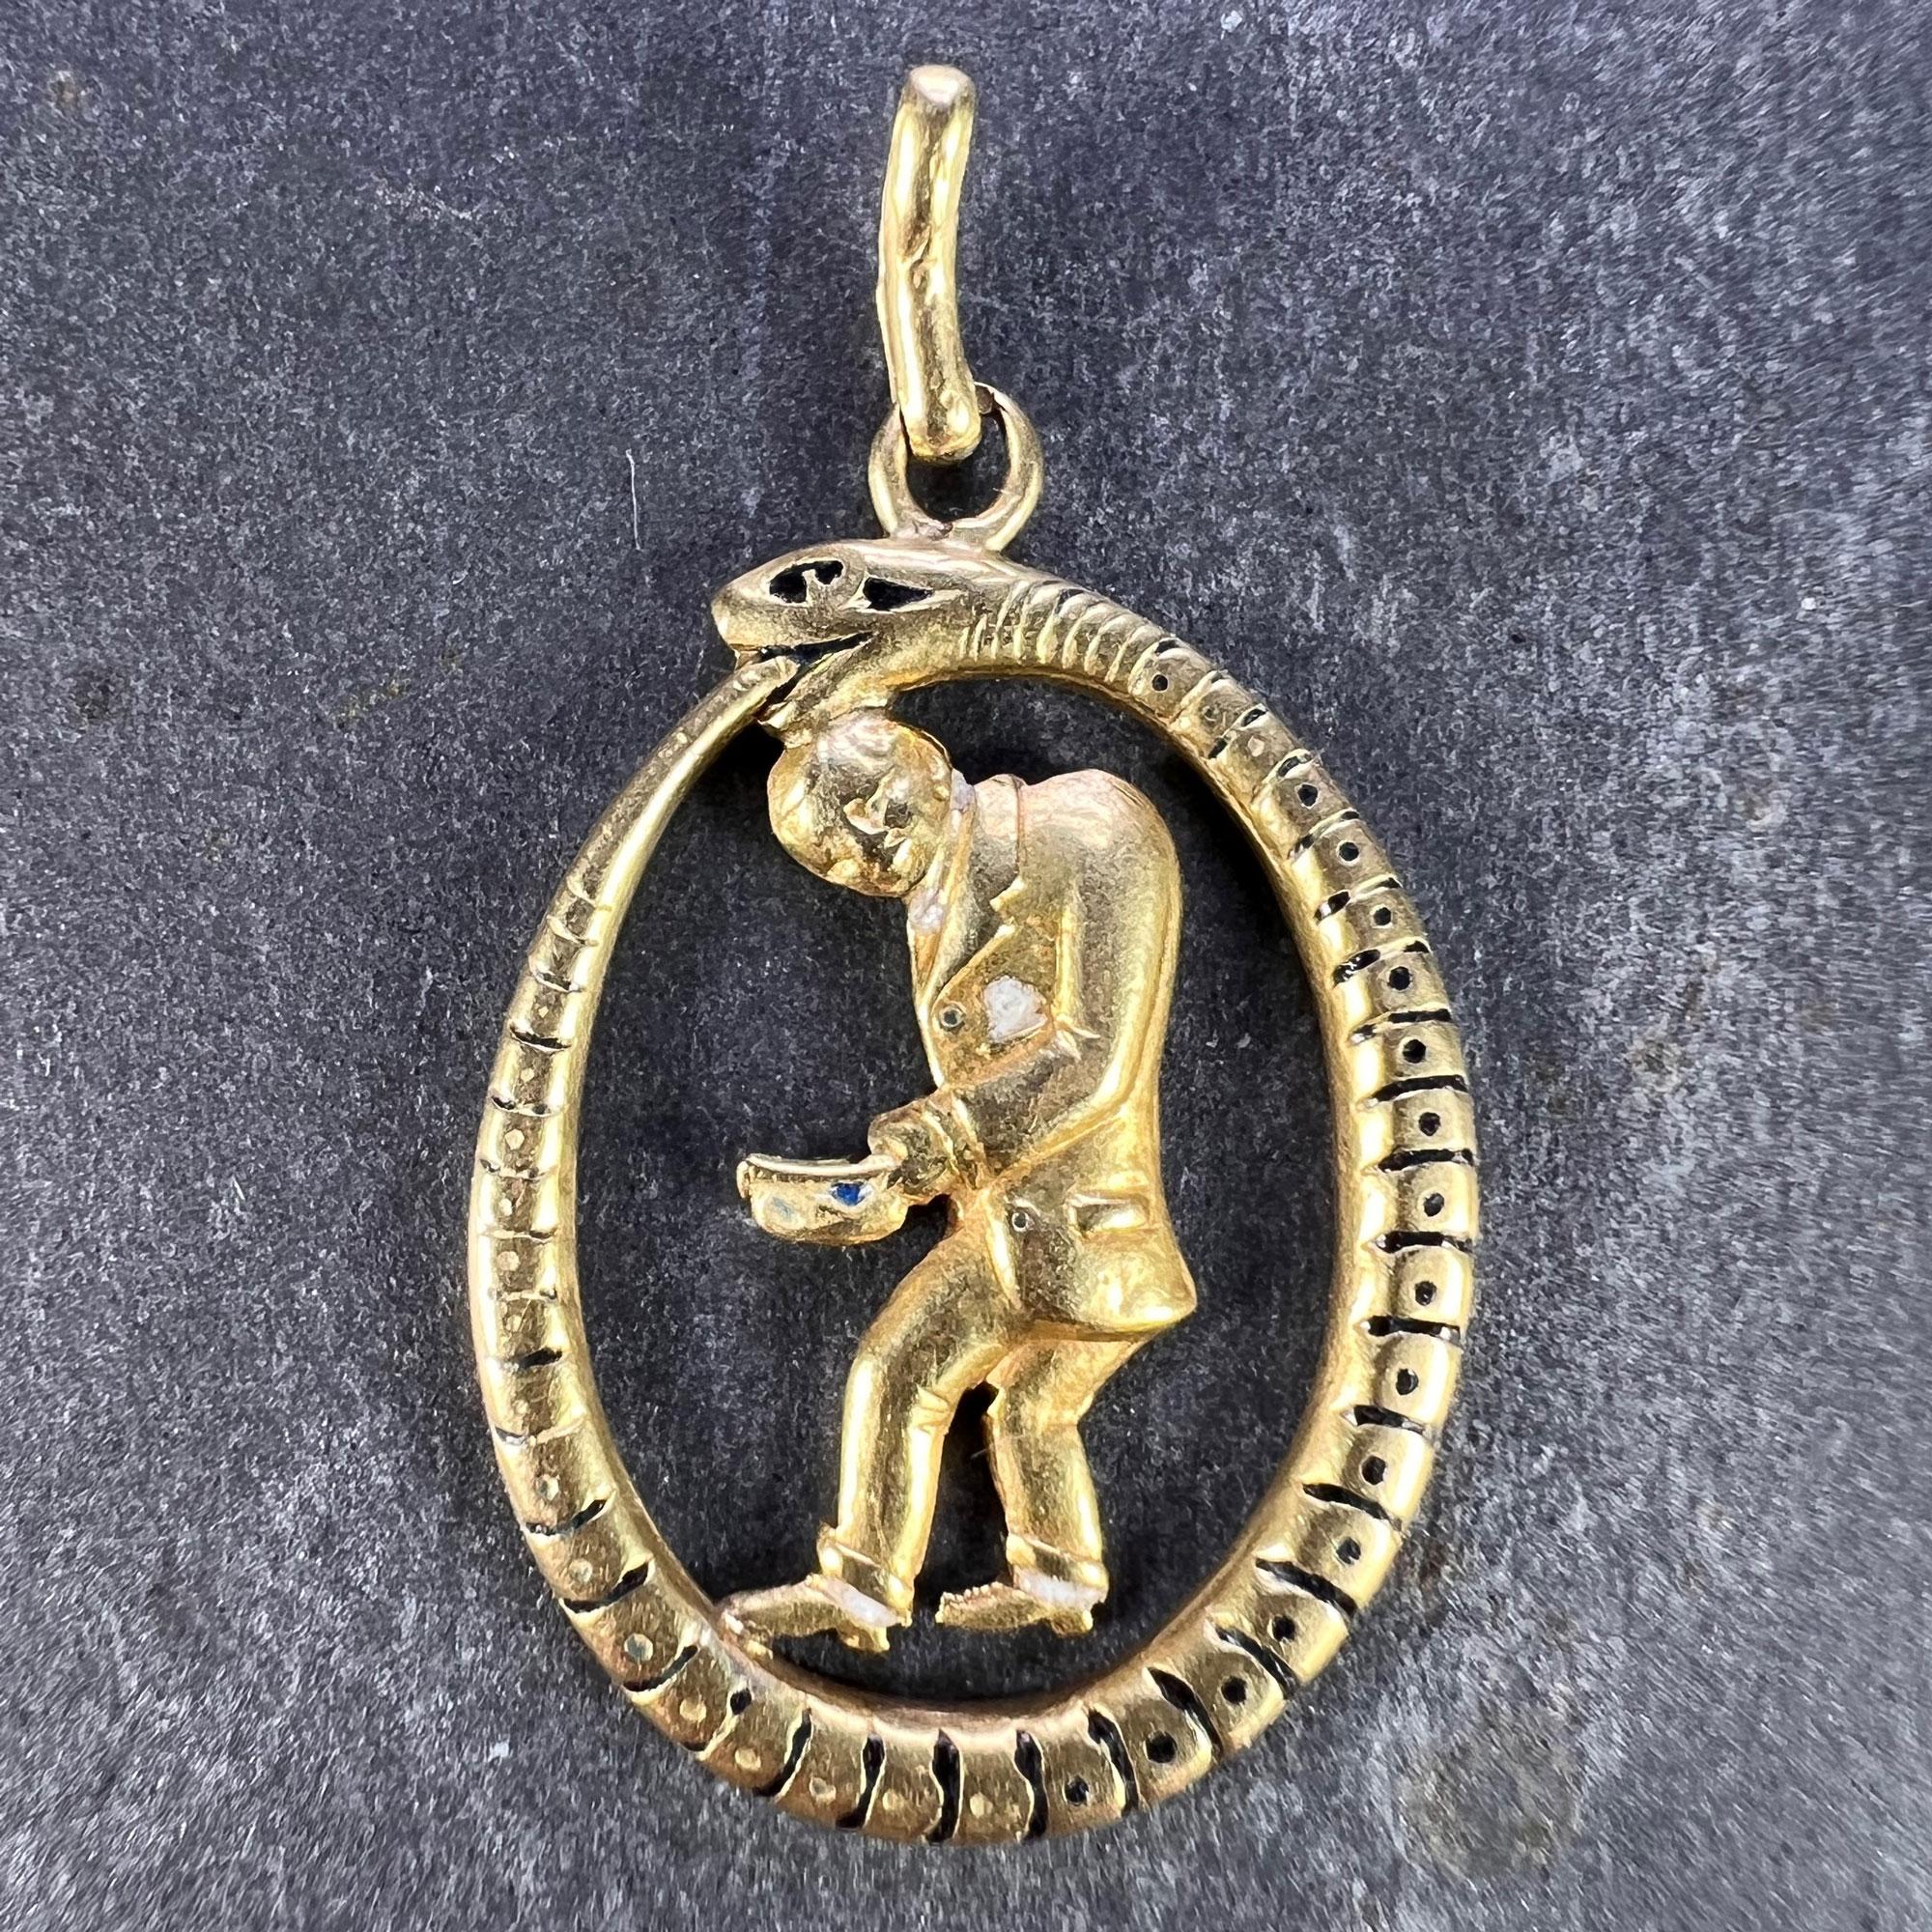 An 18 karat (18K) yellow gold and enamel charm pendant designed as an Ouroboros snake or serpent eating its own tail encircling a man in a suit holding a hat. Stamped K18 for 18 karat gold to the reverse with French import marks and an unknown